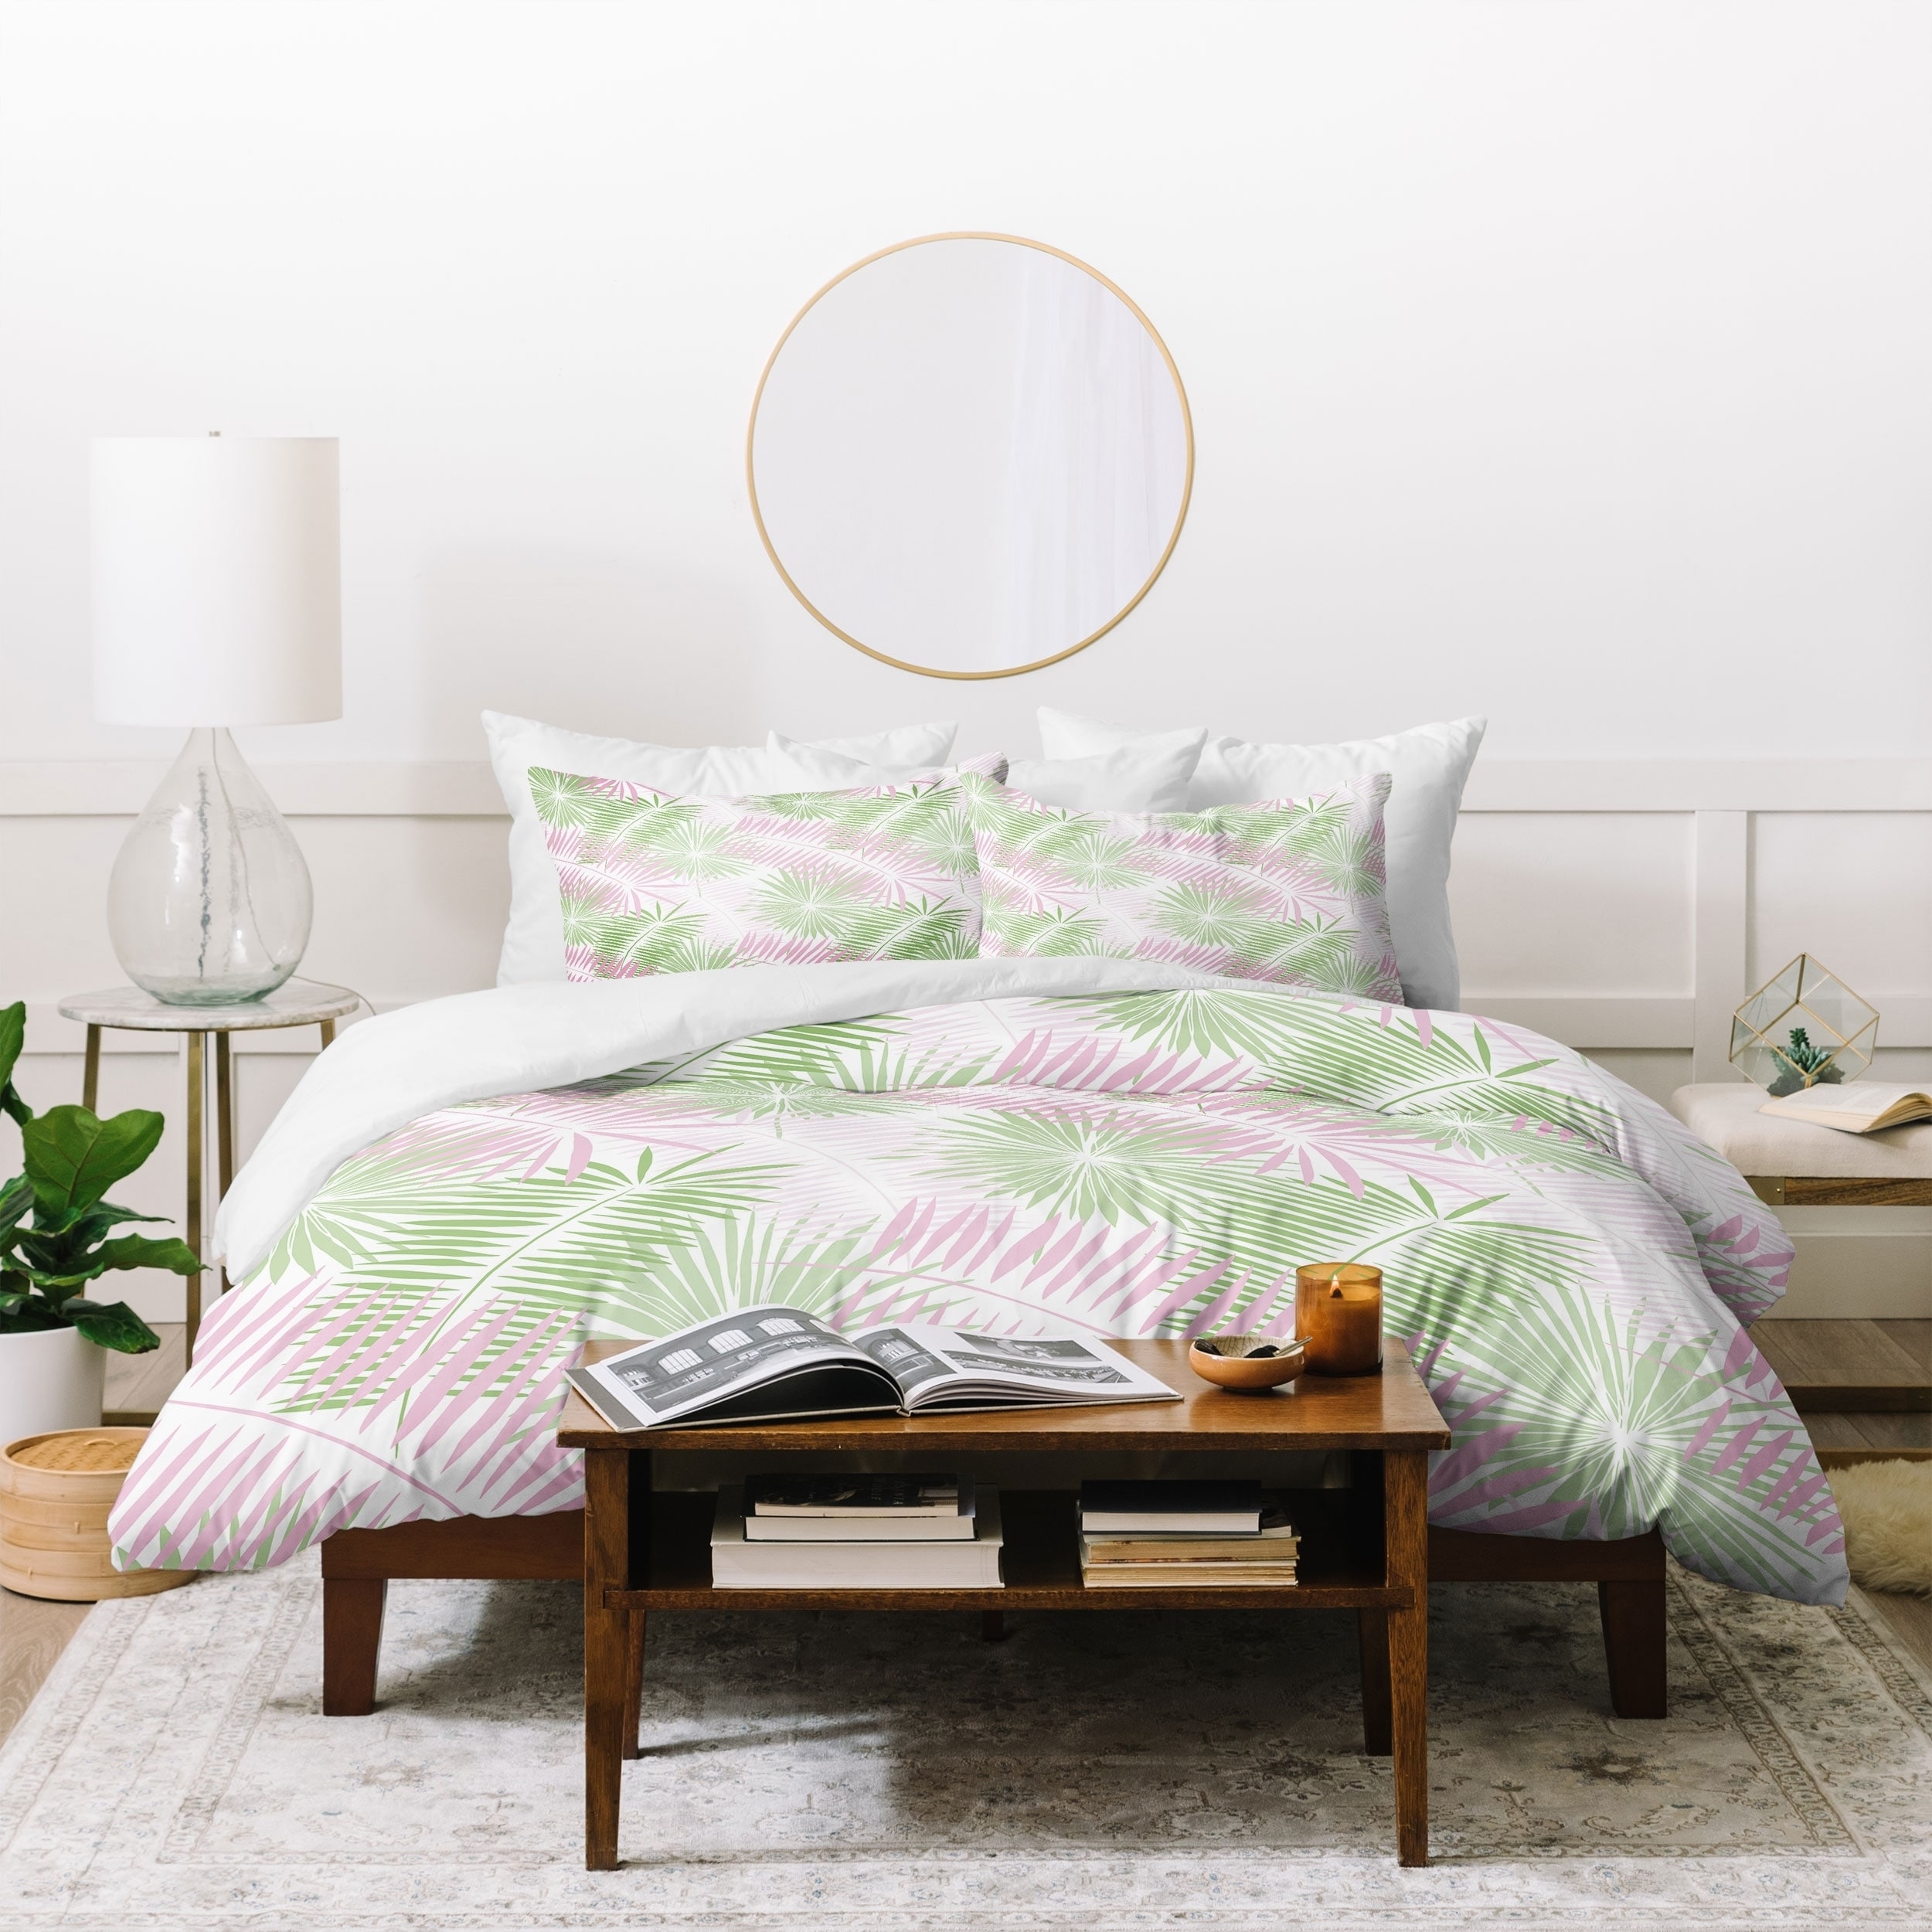 Shop Deny Designs Pink And Green Palms Duvet Cover Set 3 Piece